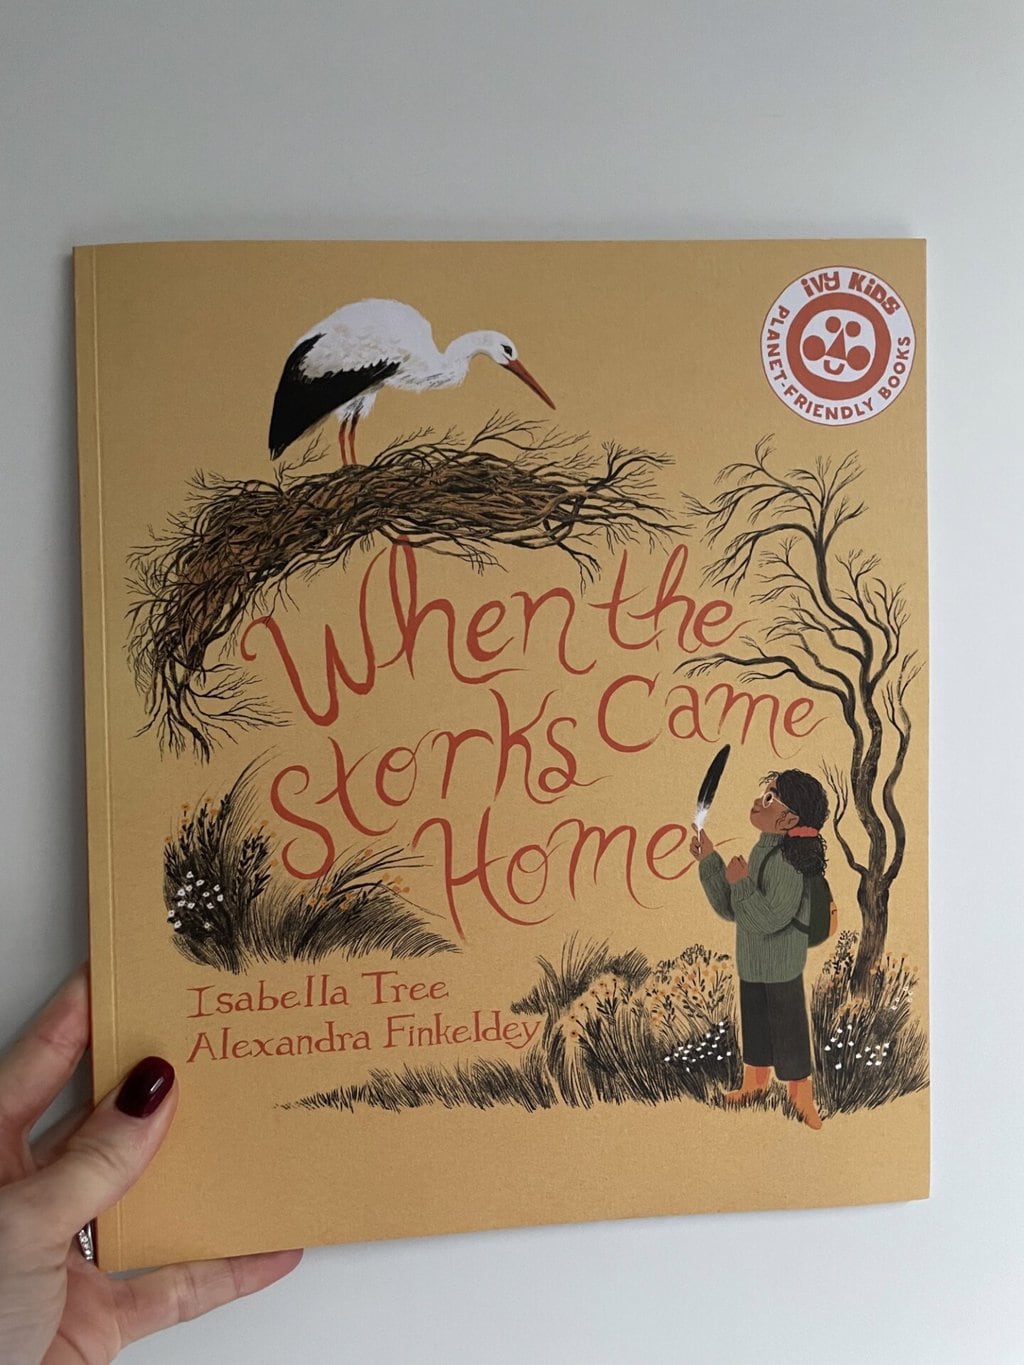 When the Storks Came Home – Isabella Tree